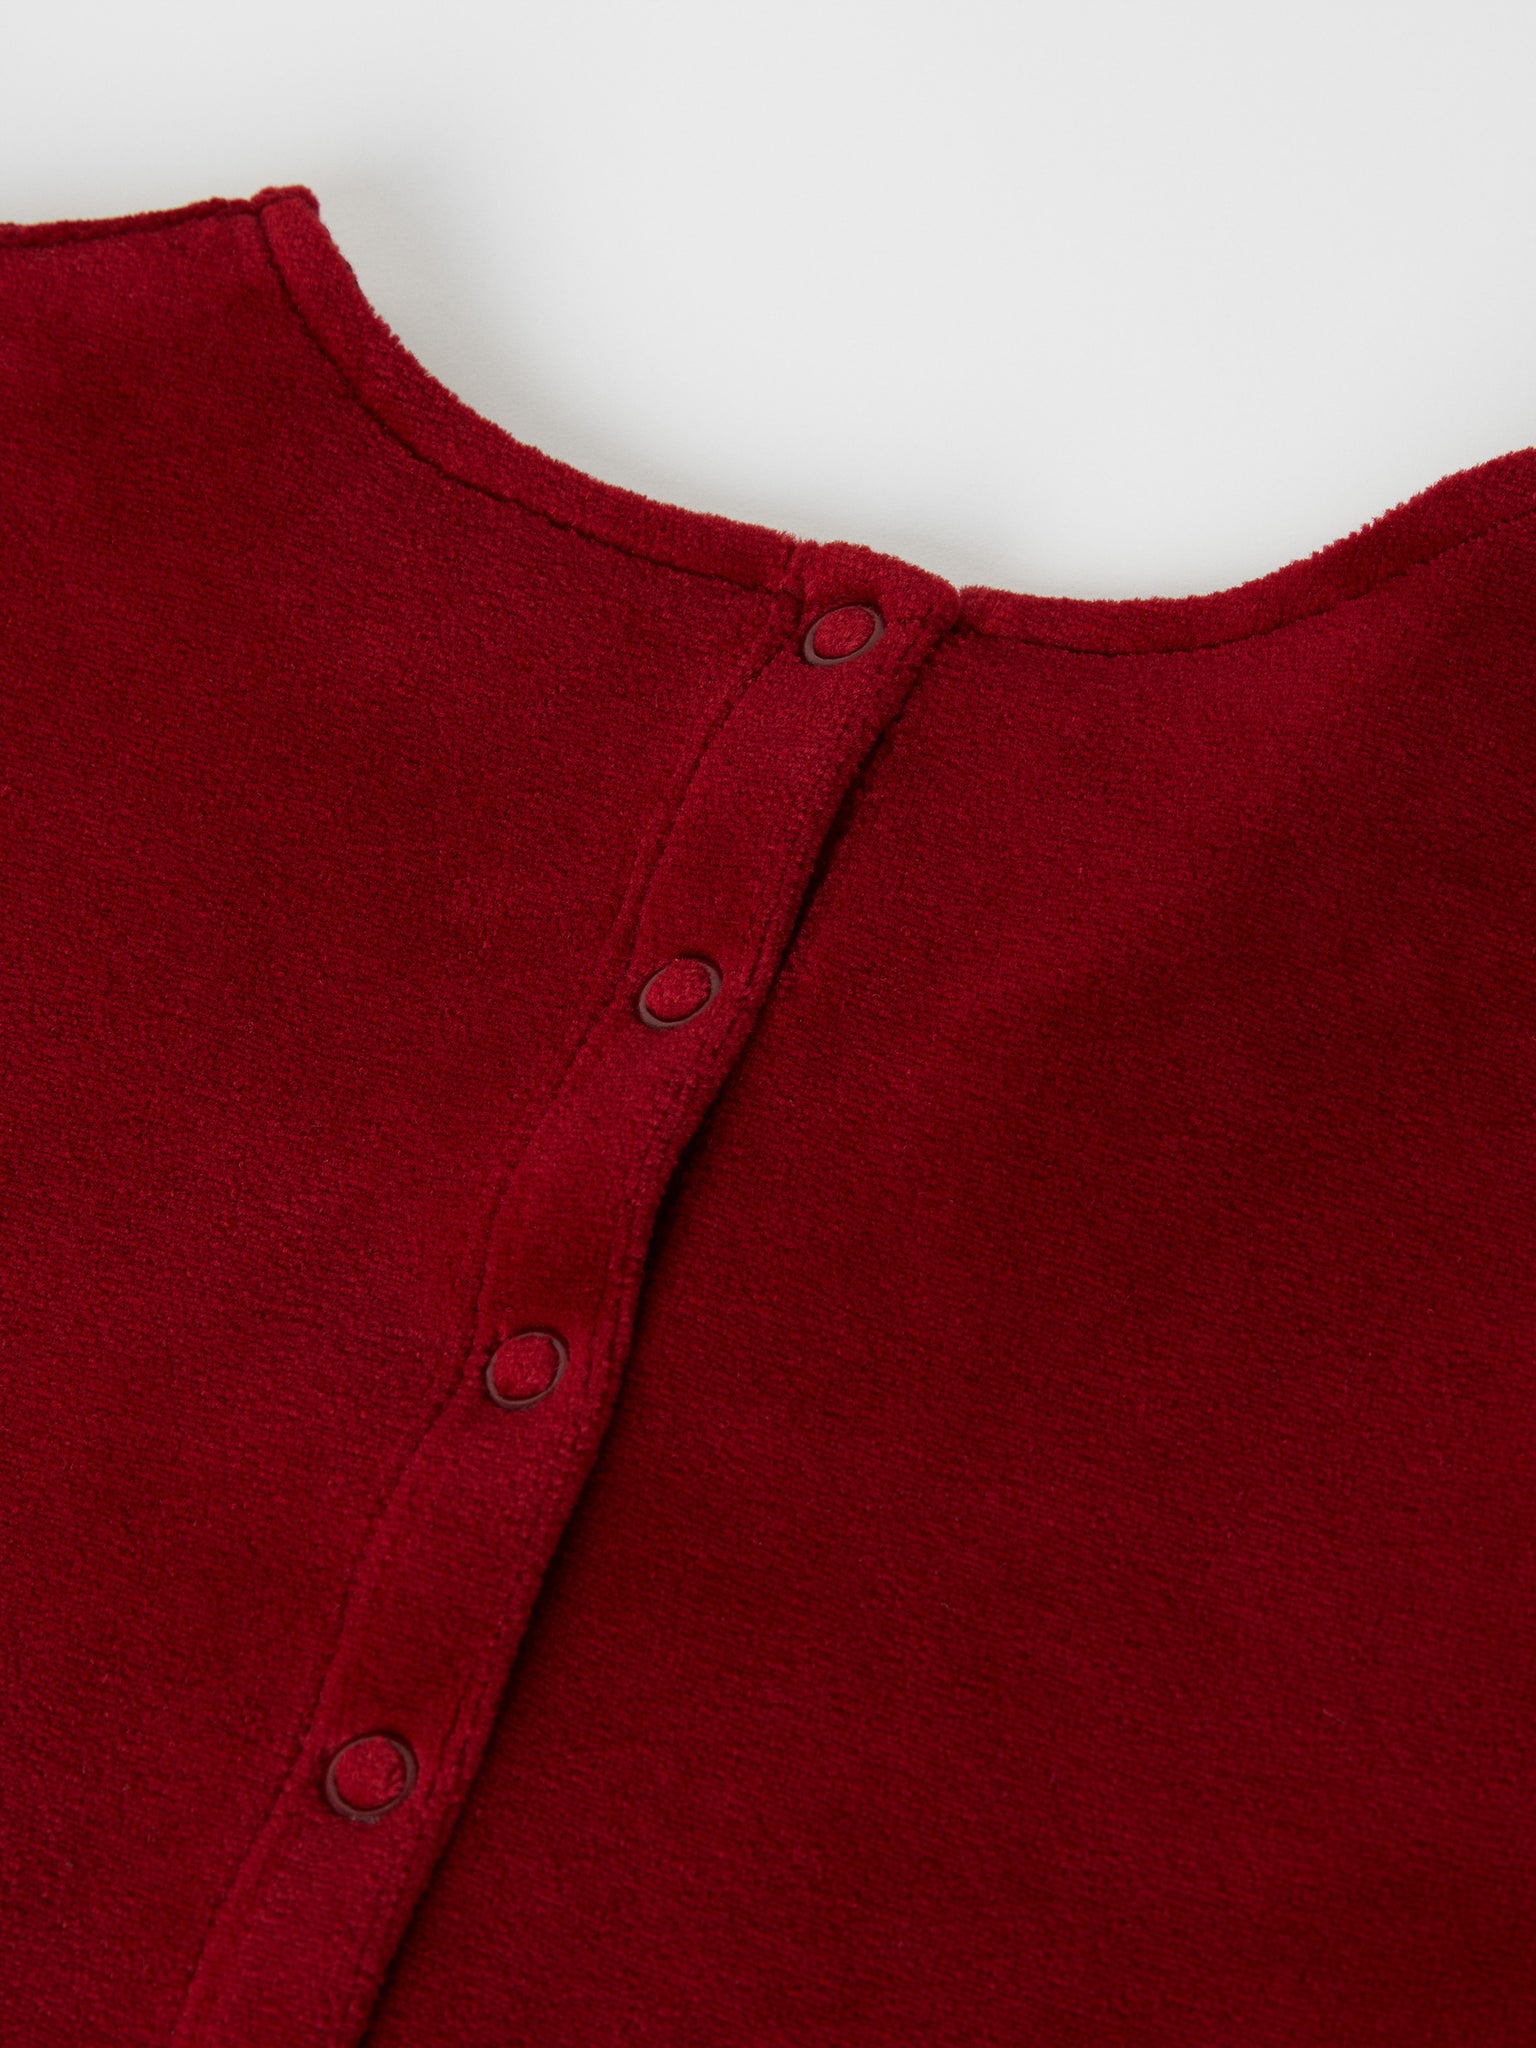 Red Velour Kids Dress from the Polarn O. Pyret kidswear collection. Ethically produced kids clothing.